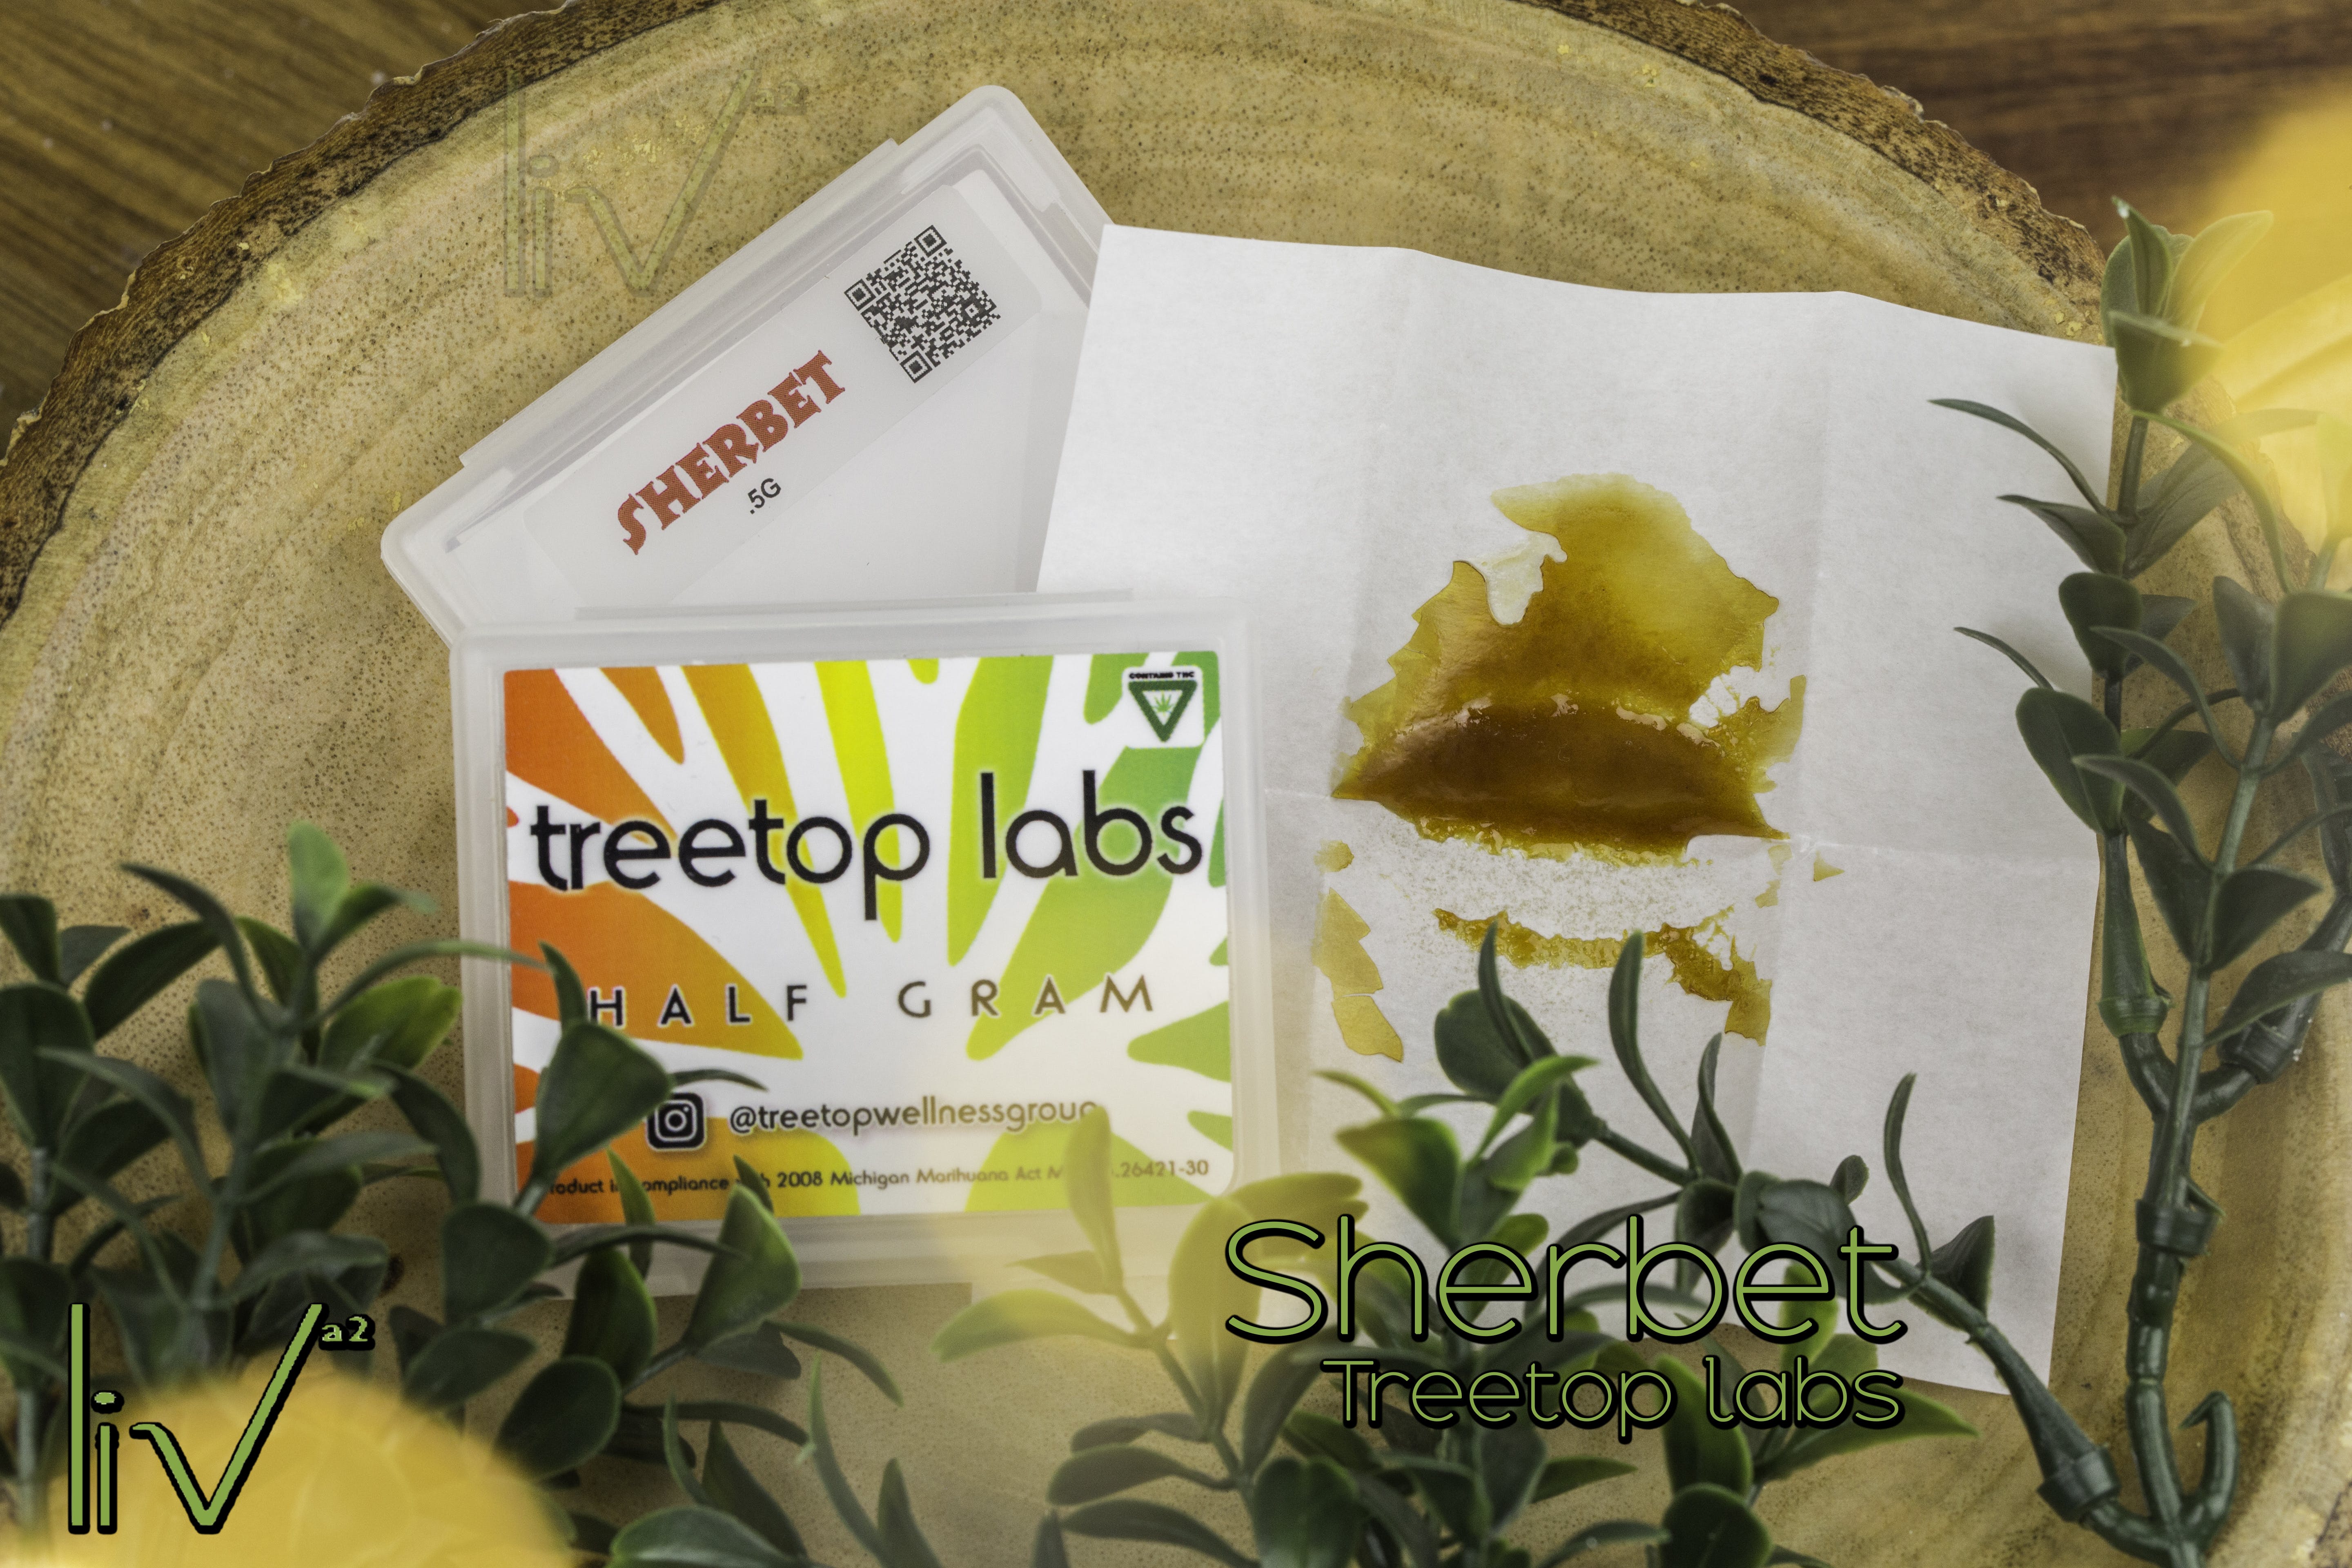 wax-tree-top-labs-5g-cured-resin-sherbet